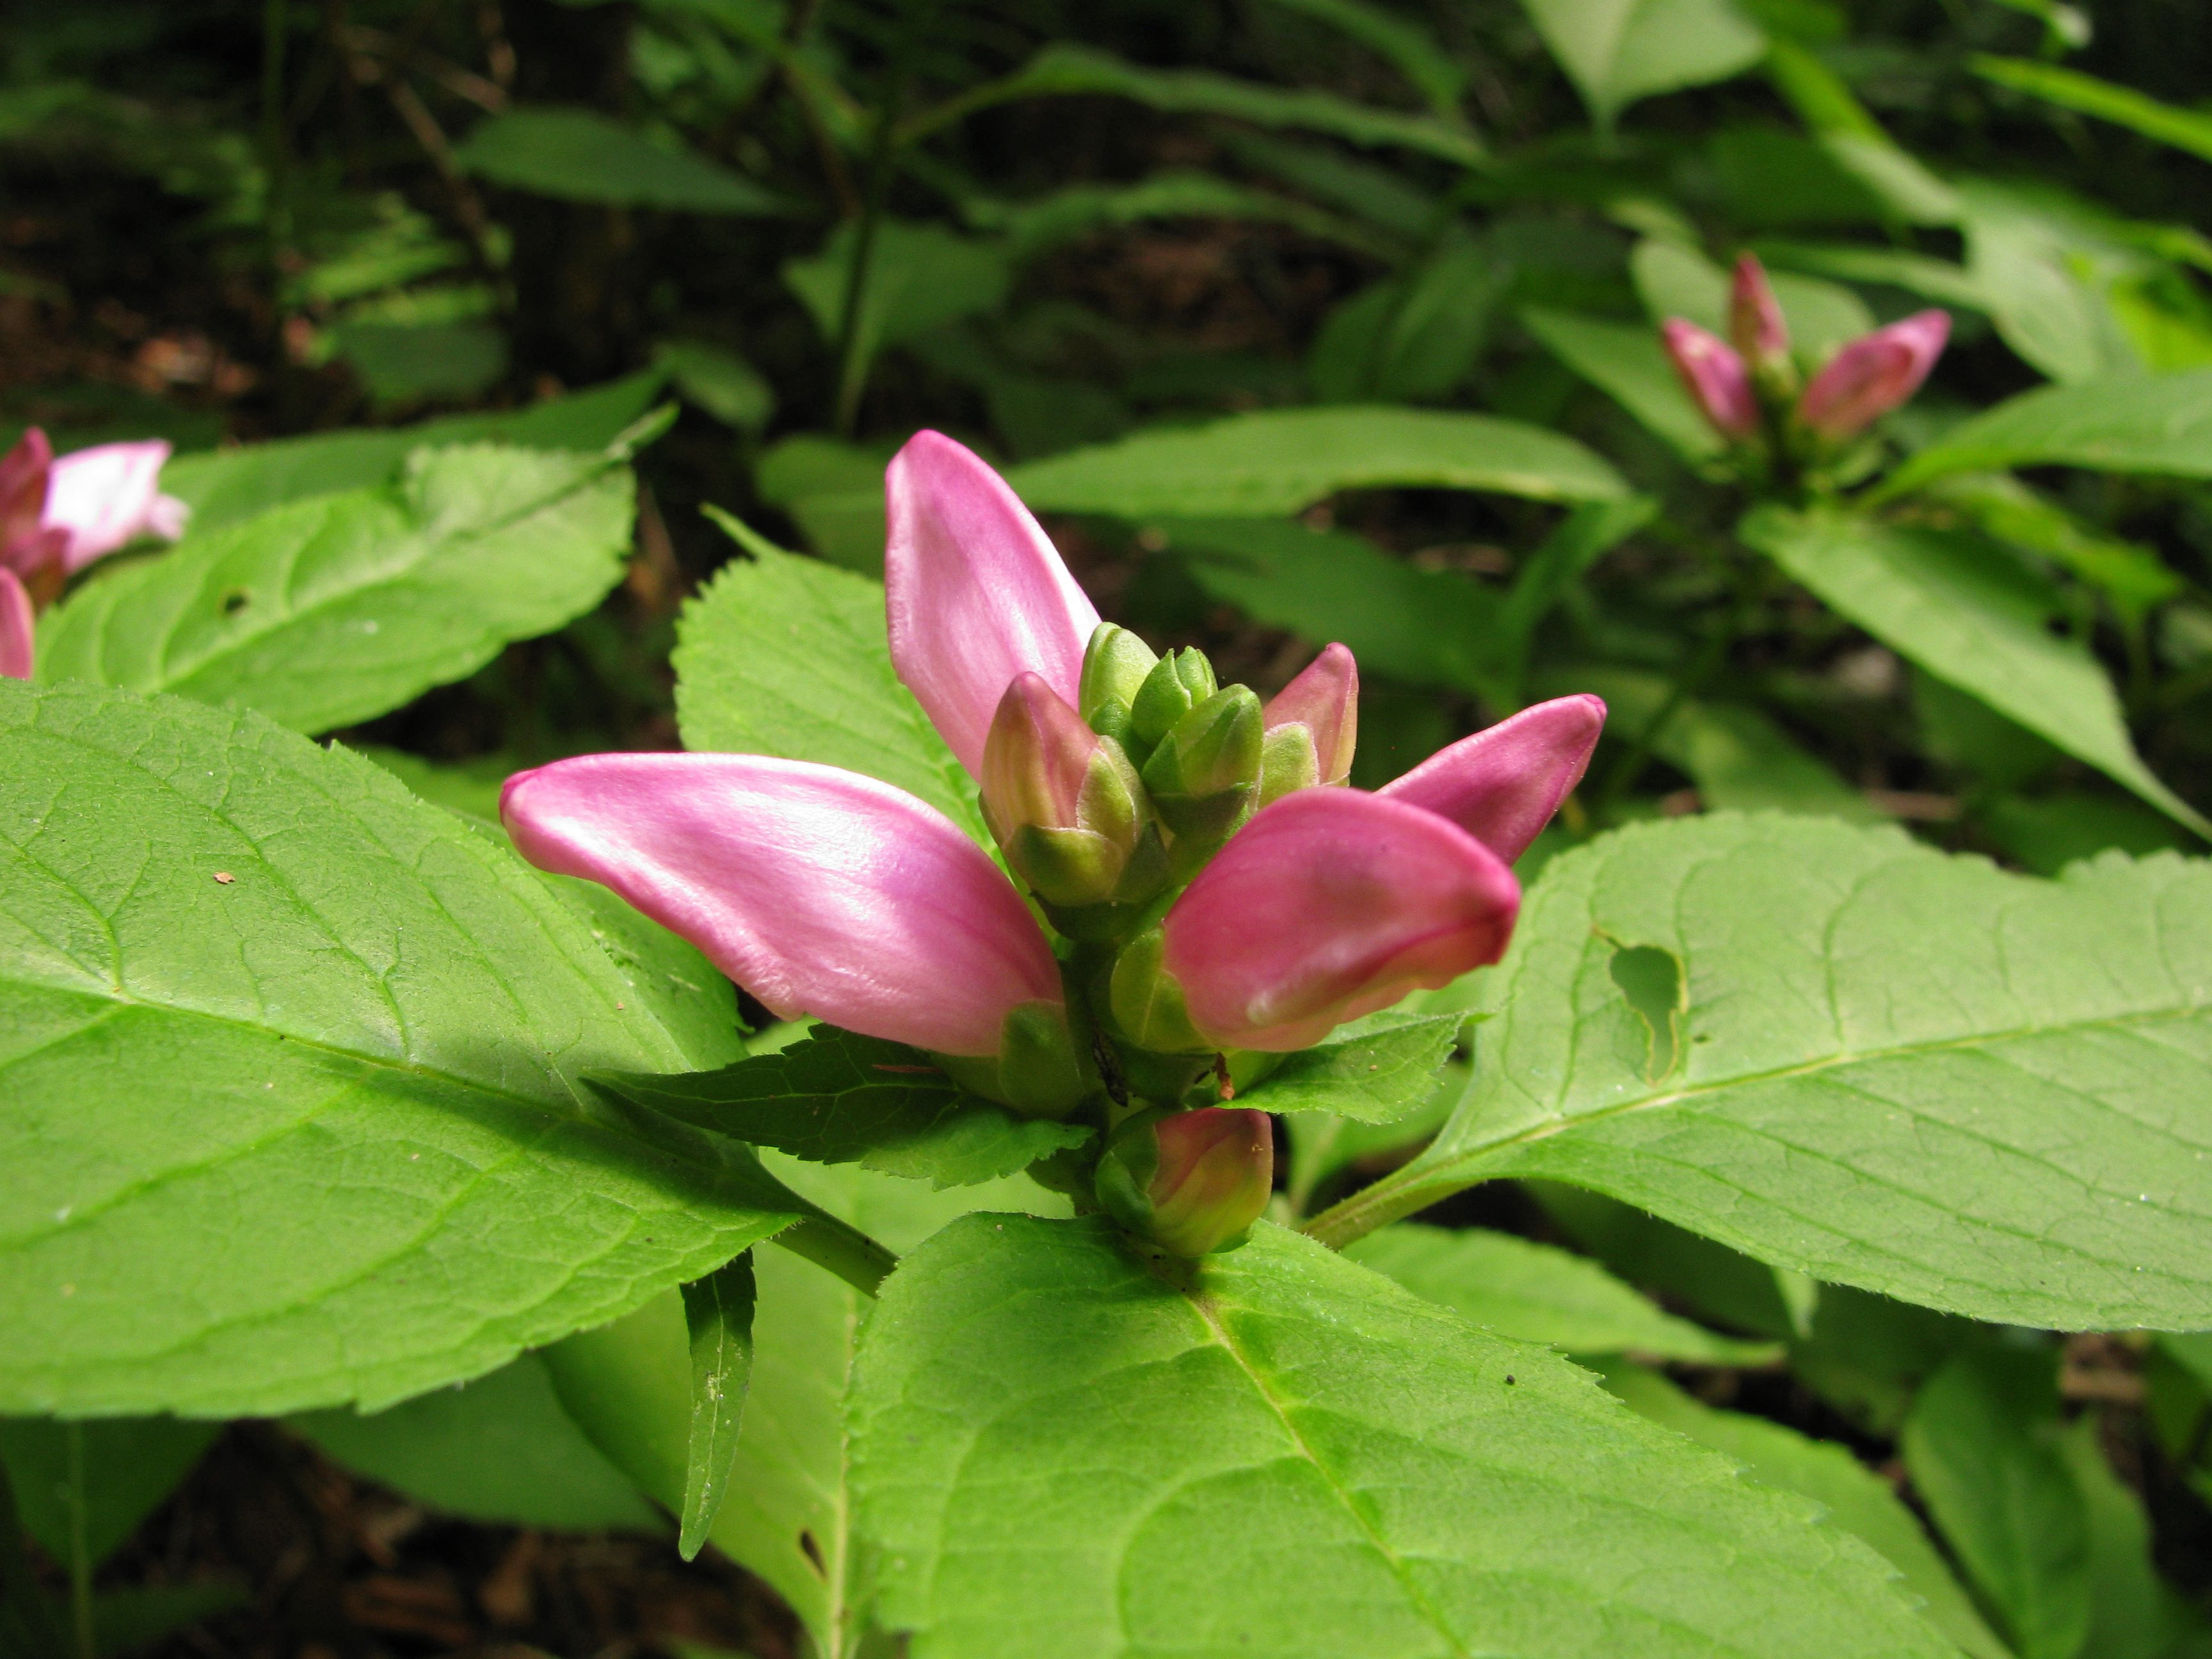 The Scientific Name is Chelone lyonii. You will likely hear them called Turtlehead. This picture shows the Close-up of tubular flowers shaped somewhat like a turtle's head.....using your imagination. of Chelone lyonii